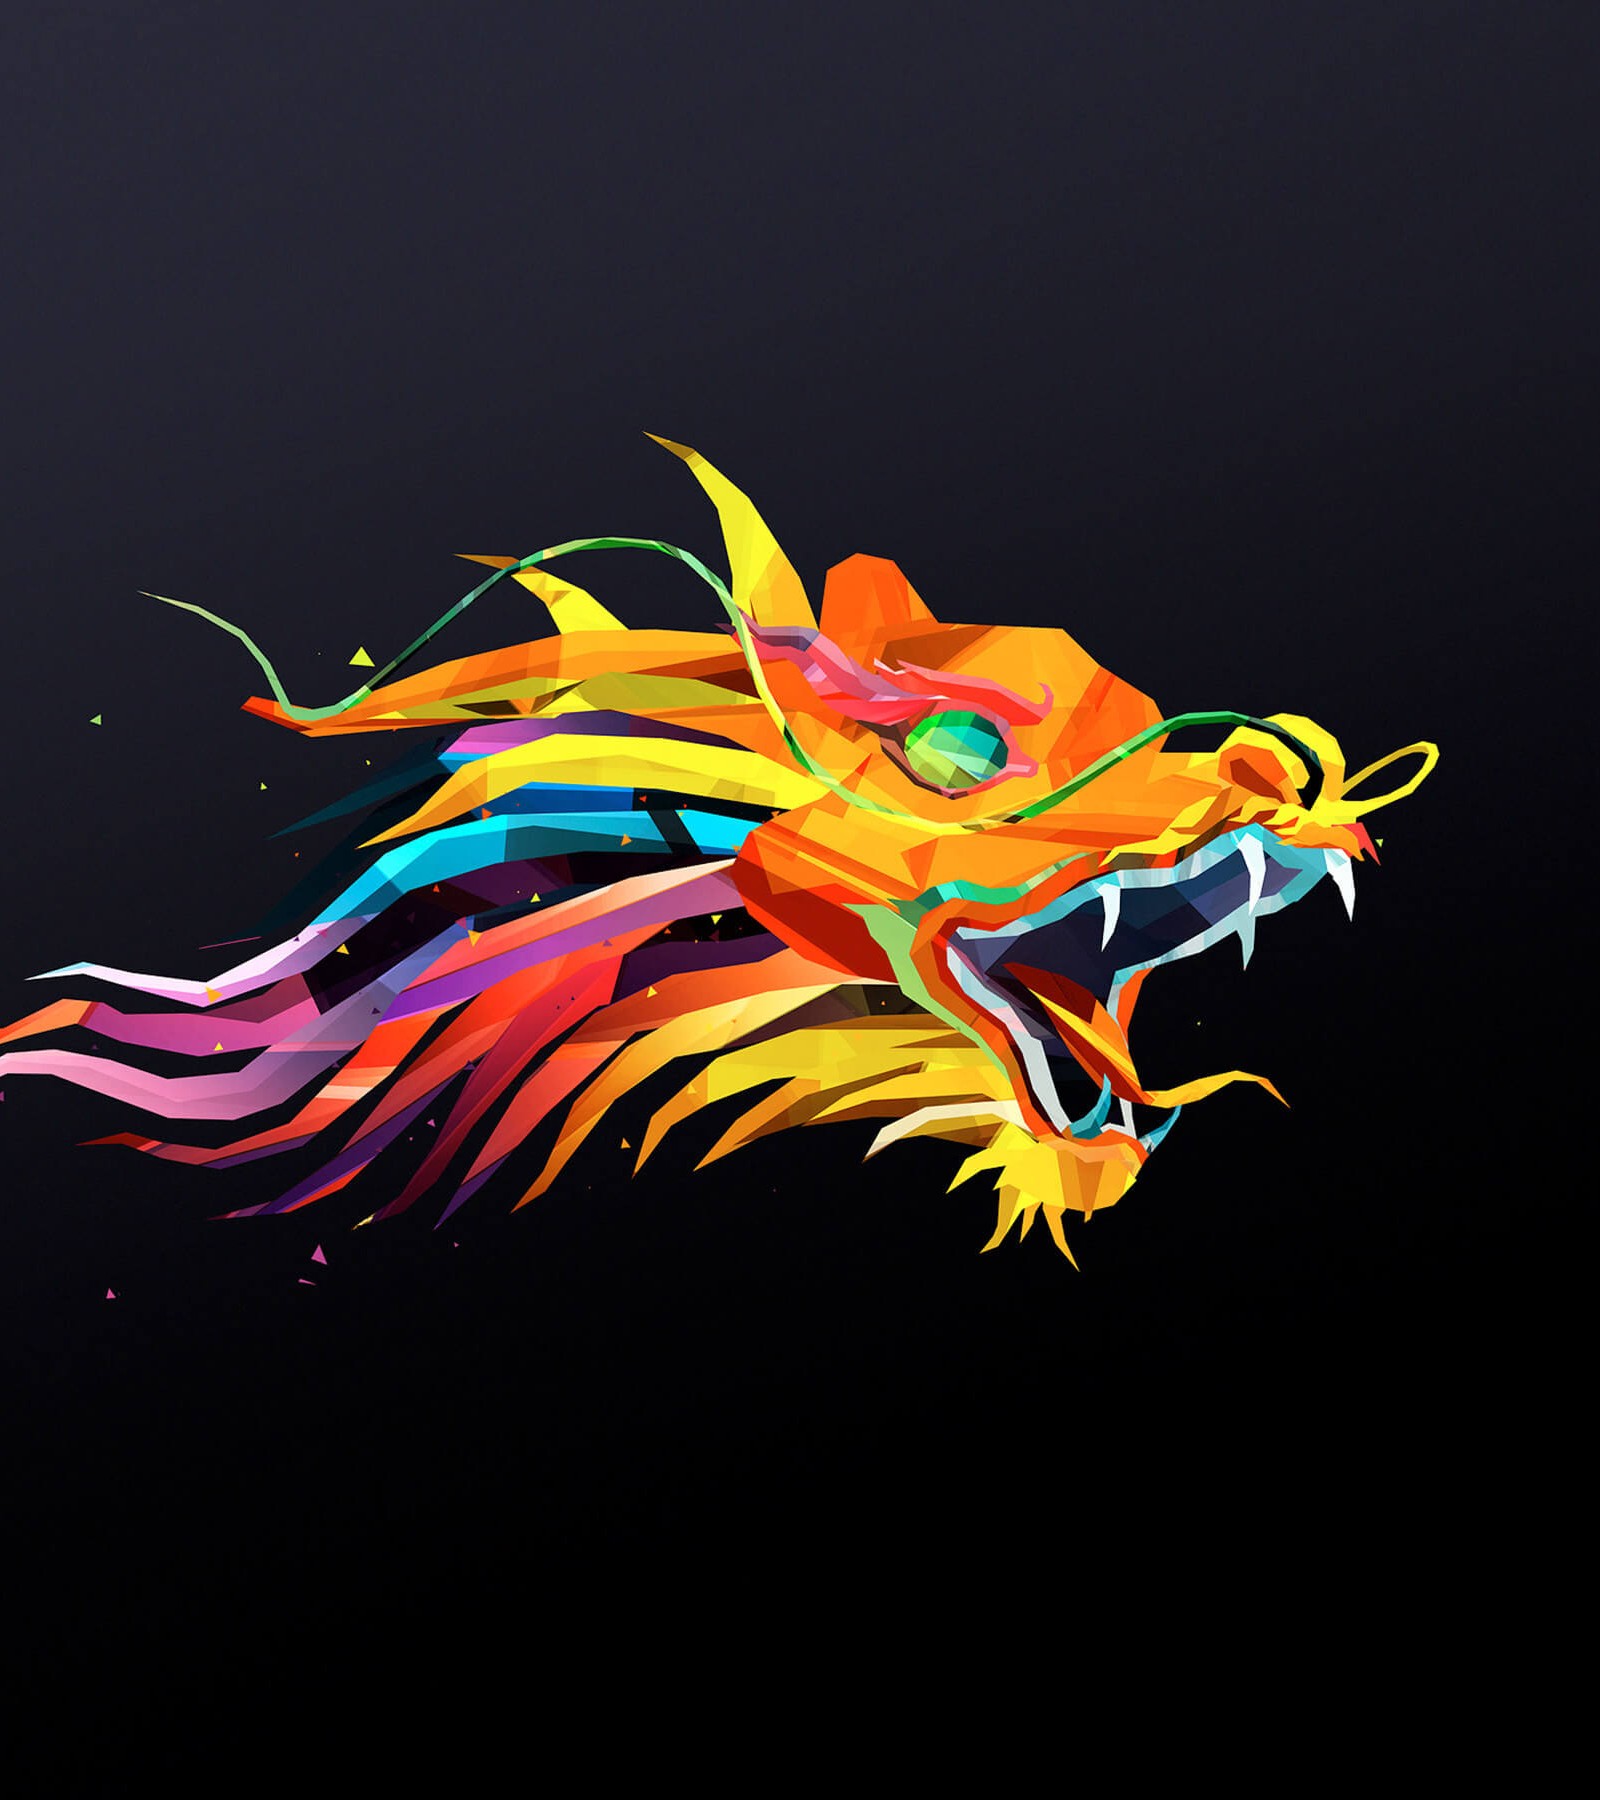 The Dragon Wallpaper For Amazon Kindle Fire HDx